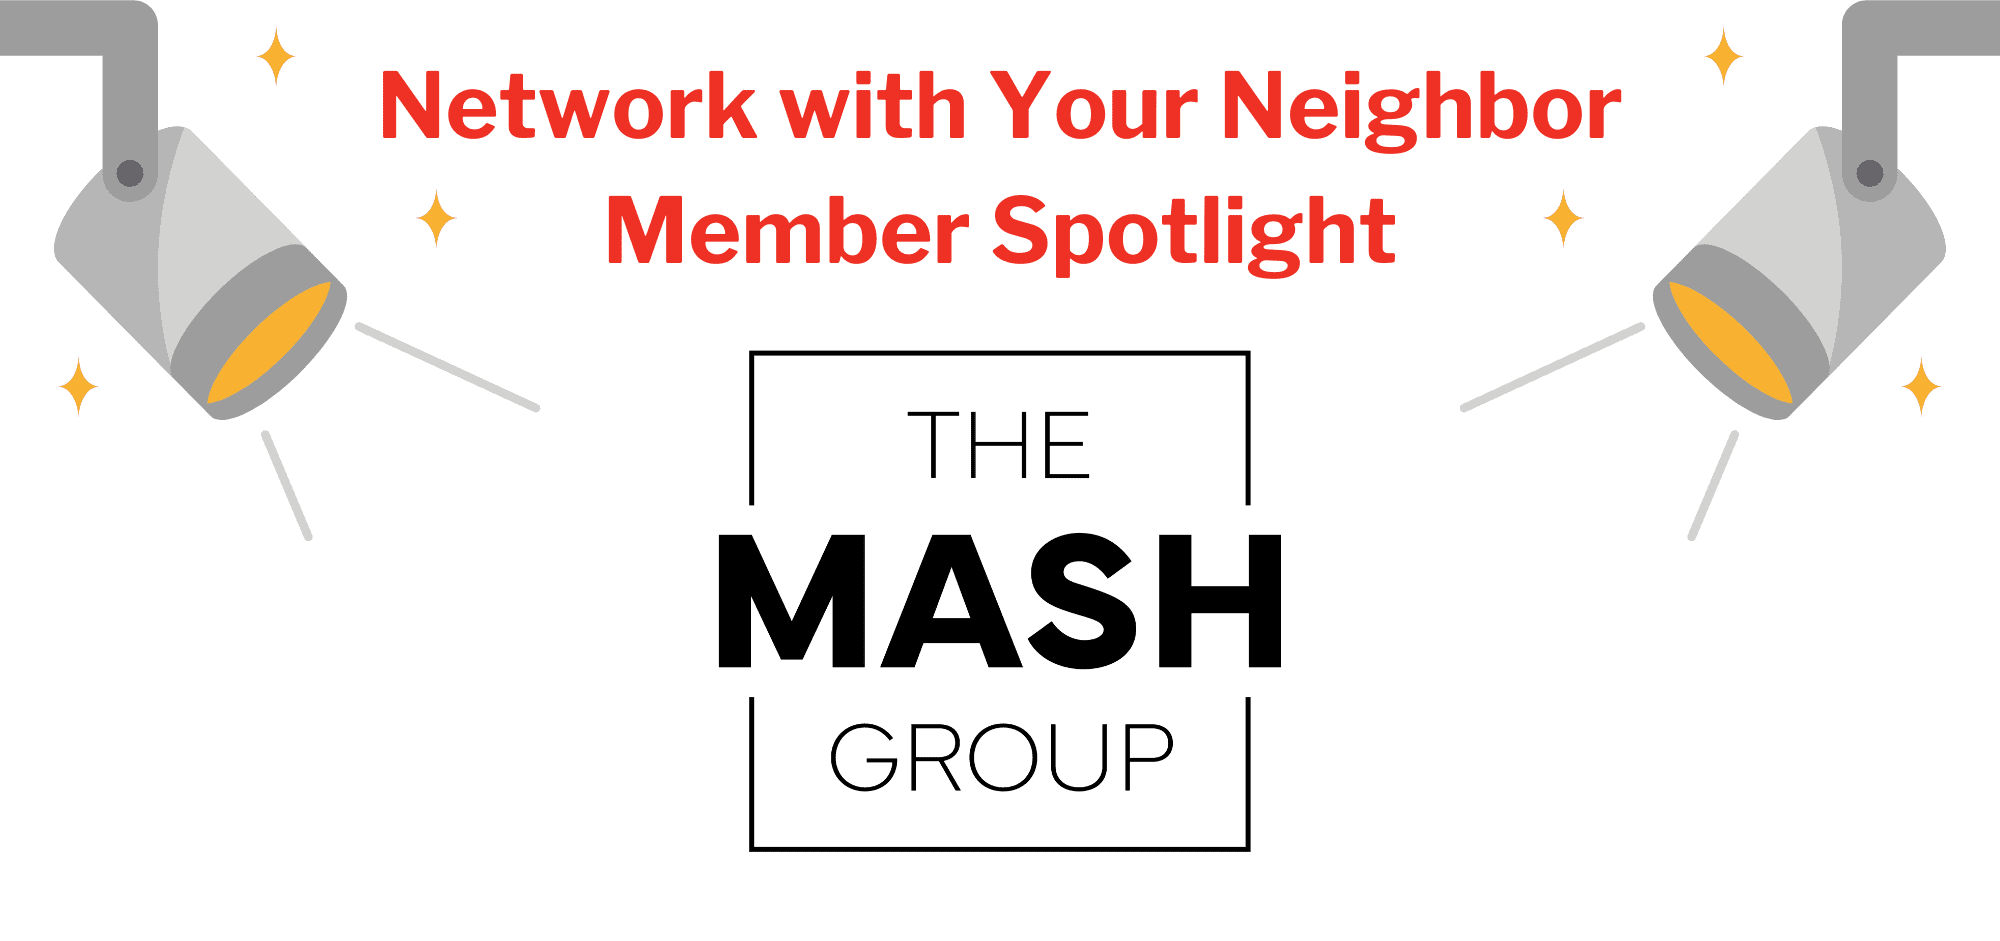 Network with Your Neighbor - Member Spotlight - THE MASH GROUP